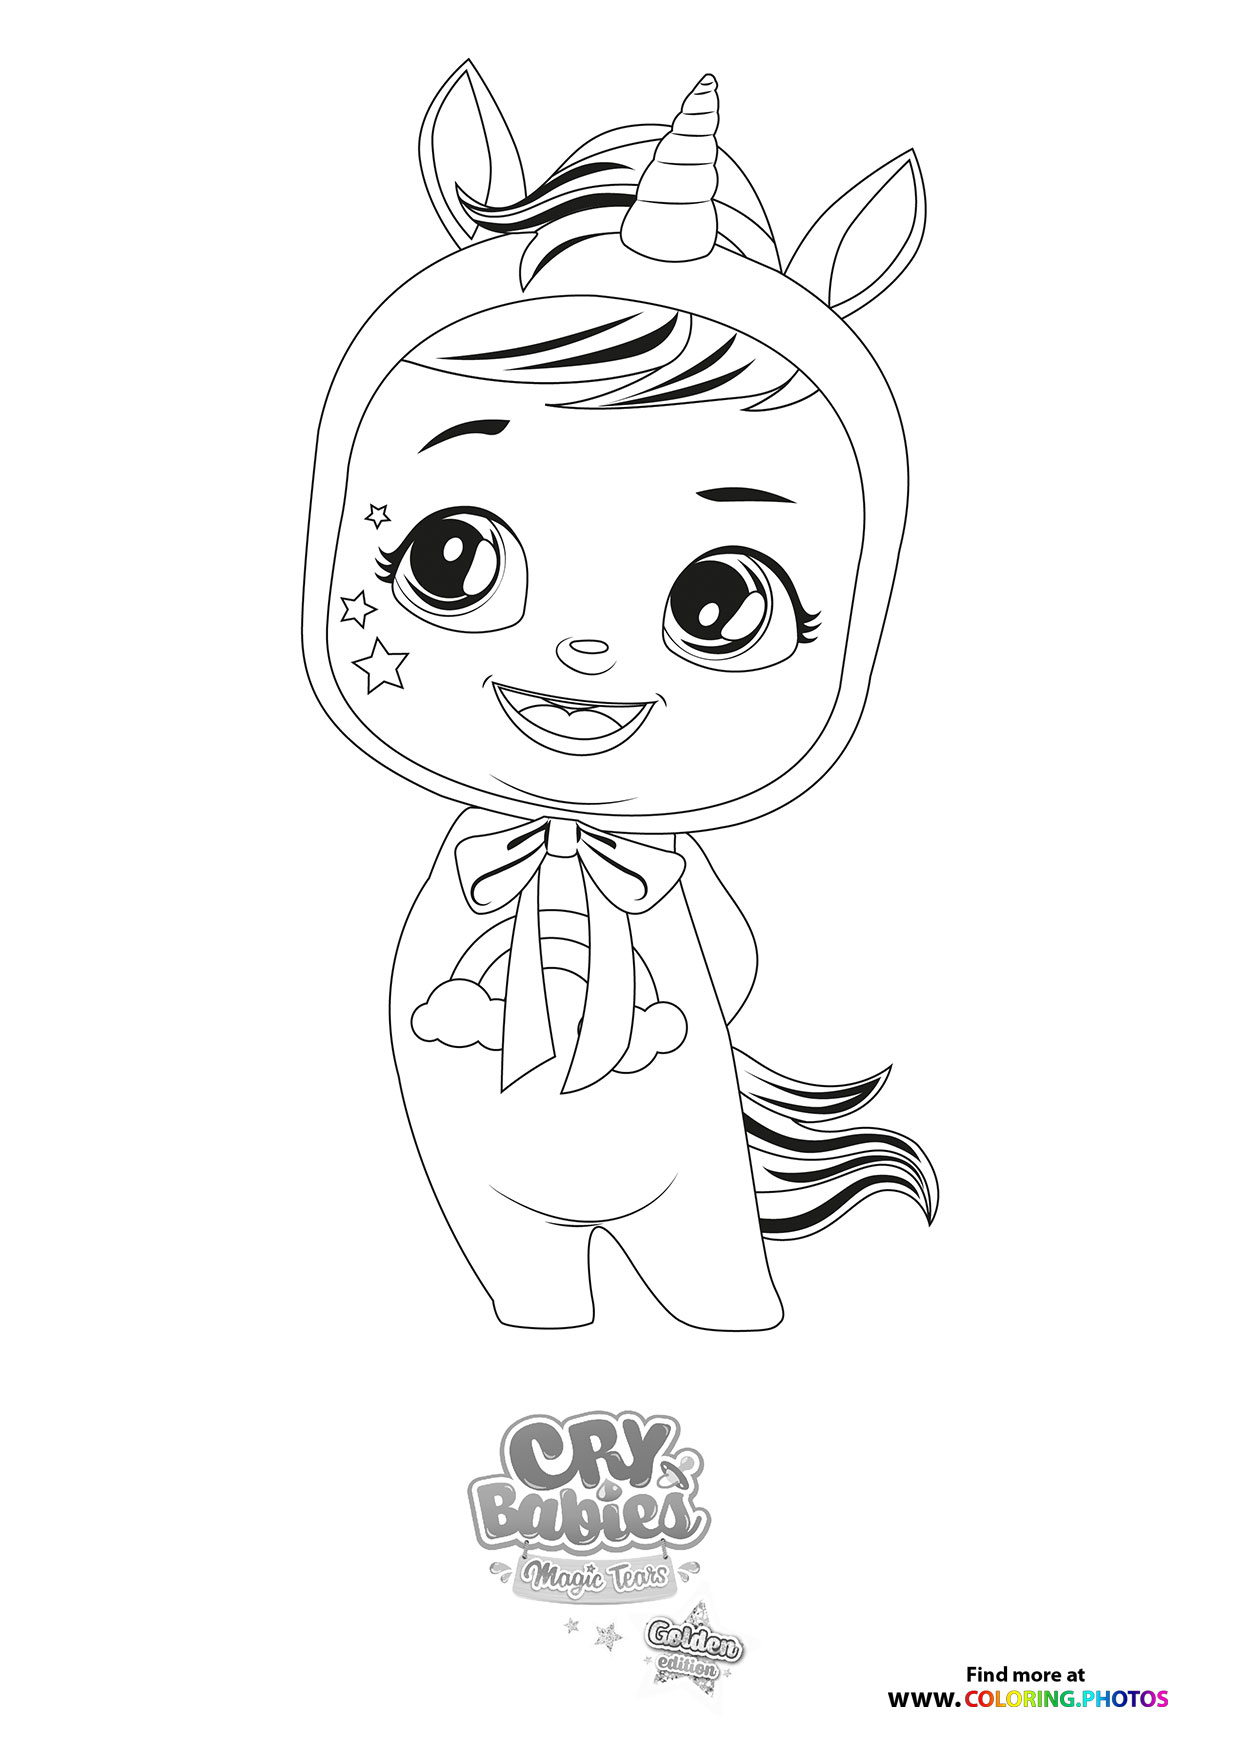 Cry Babies - Gold Edition - Coloring Pages for kids | Free and easy print